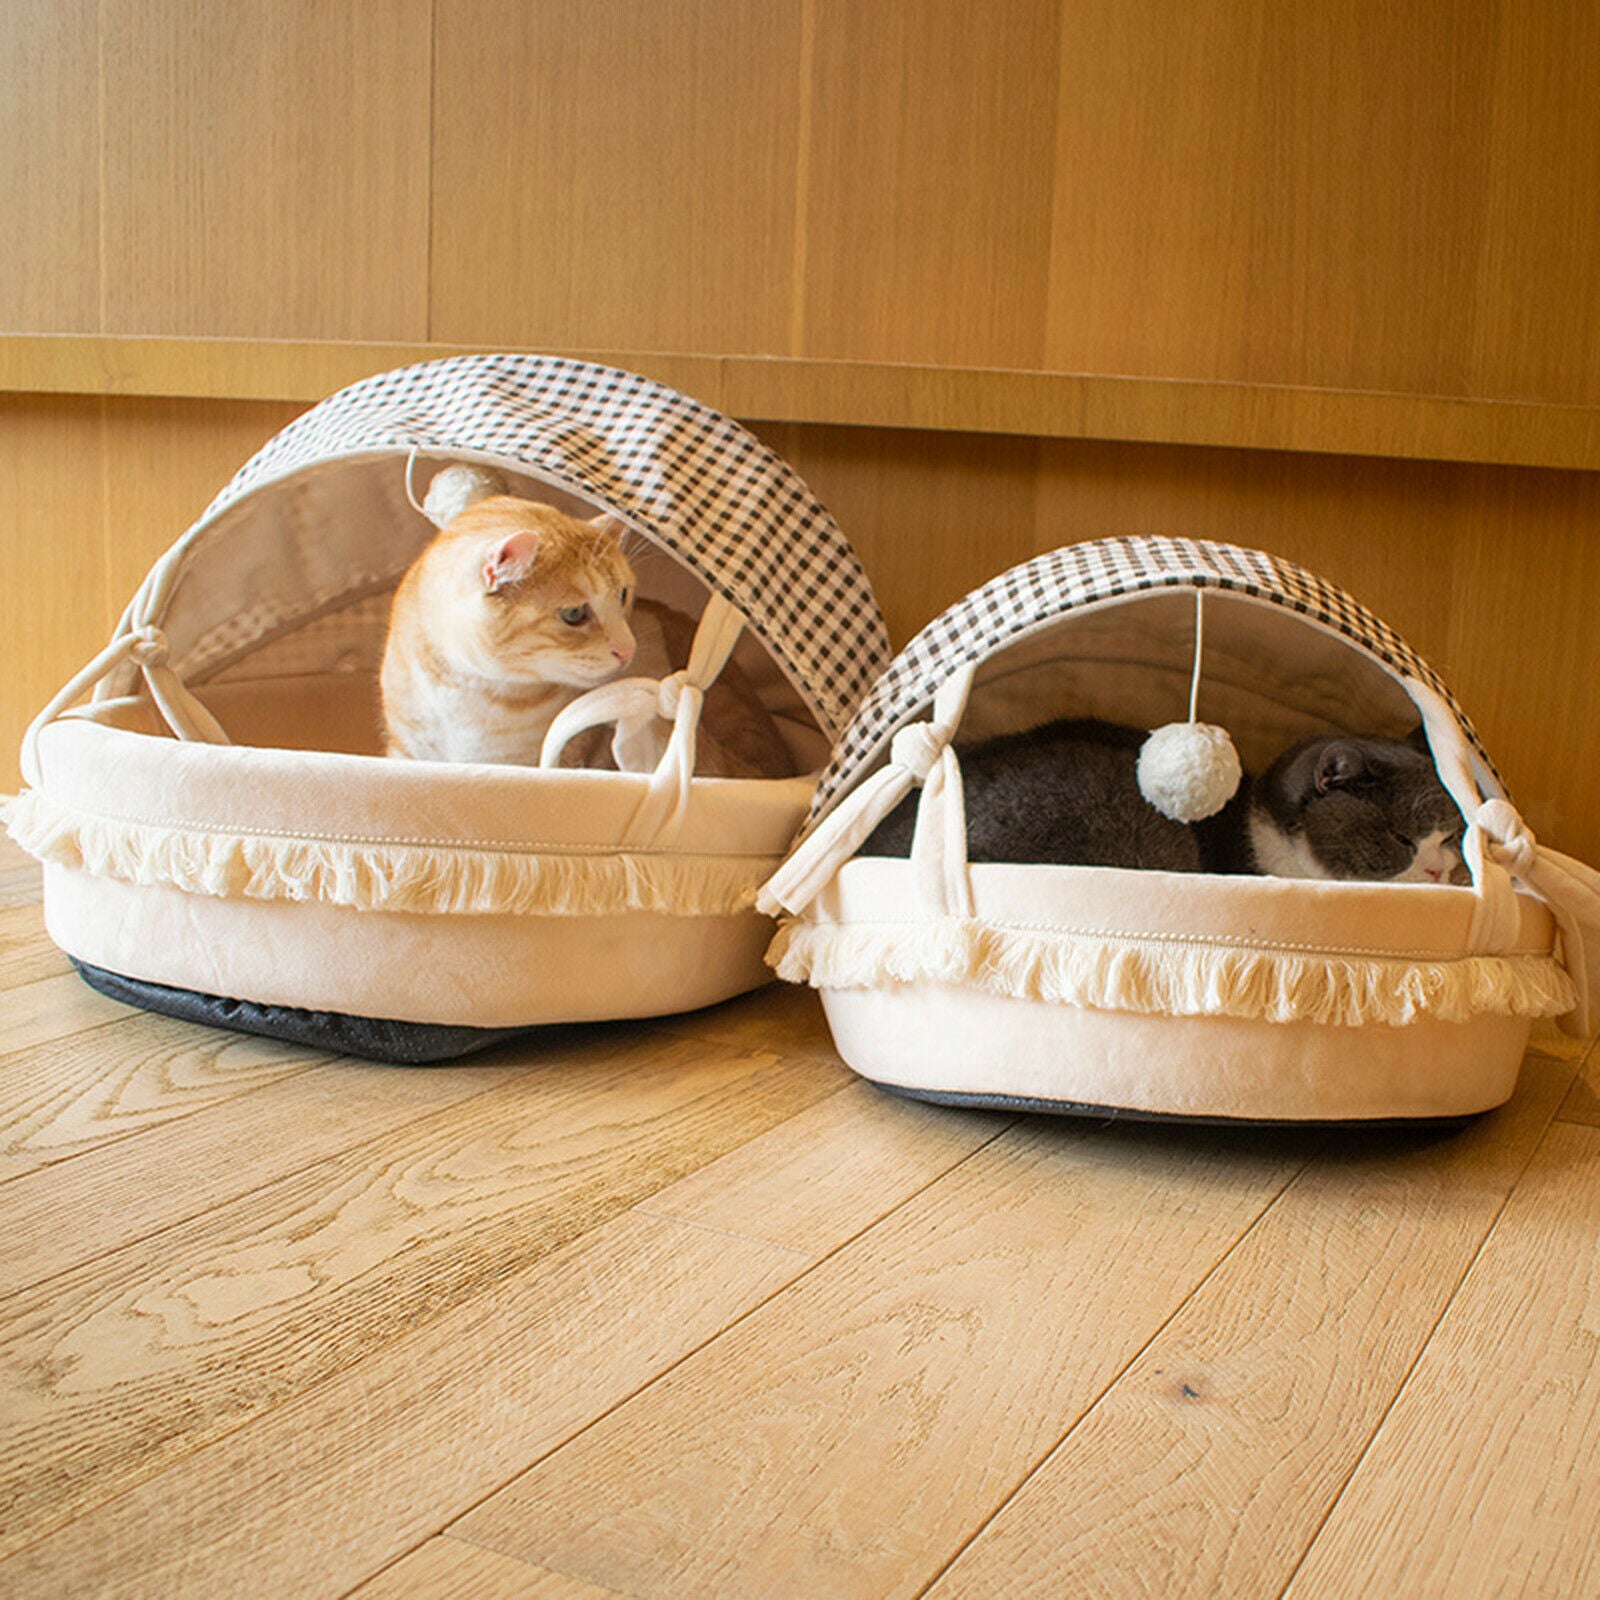 Pet Nest Bed Thick Soft Plush with Foldable Cover Cat House for Small Dogs